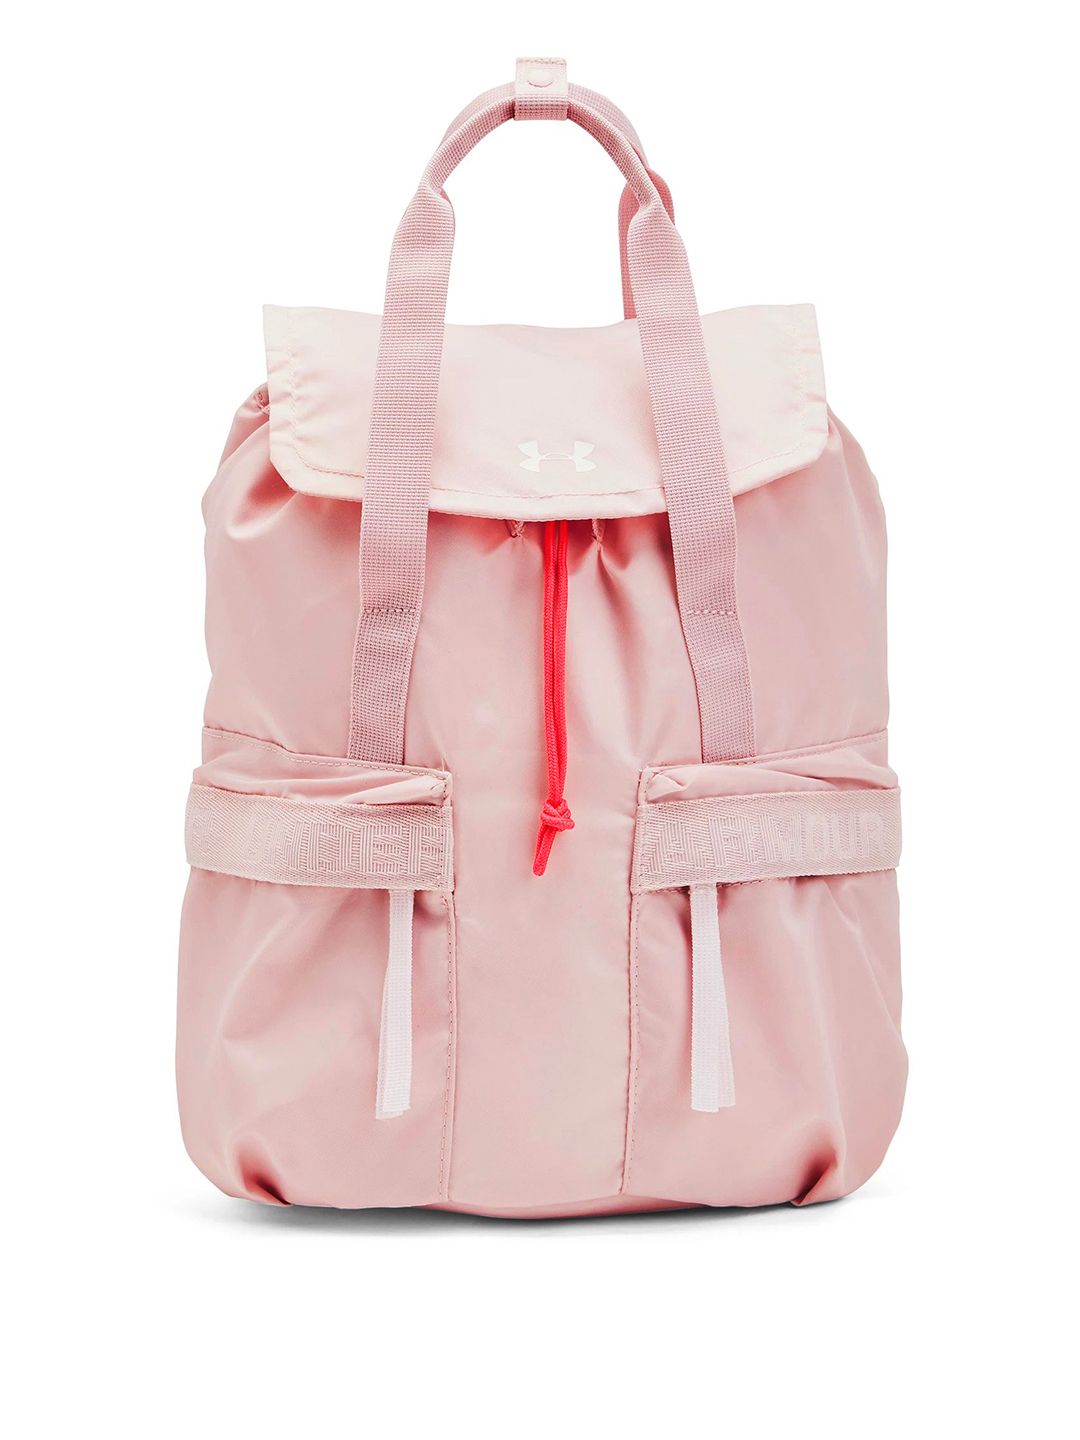 UNDER ARMOUR Women Pink Solid Backpack Price in India